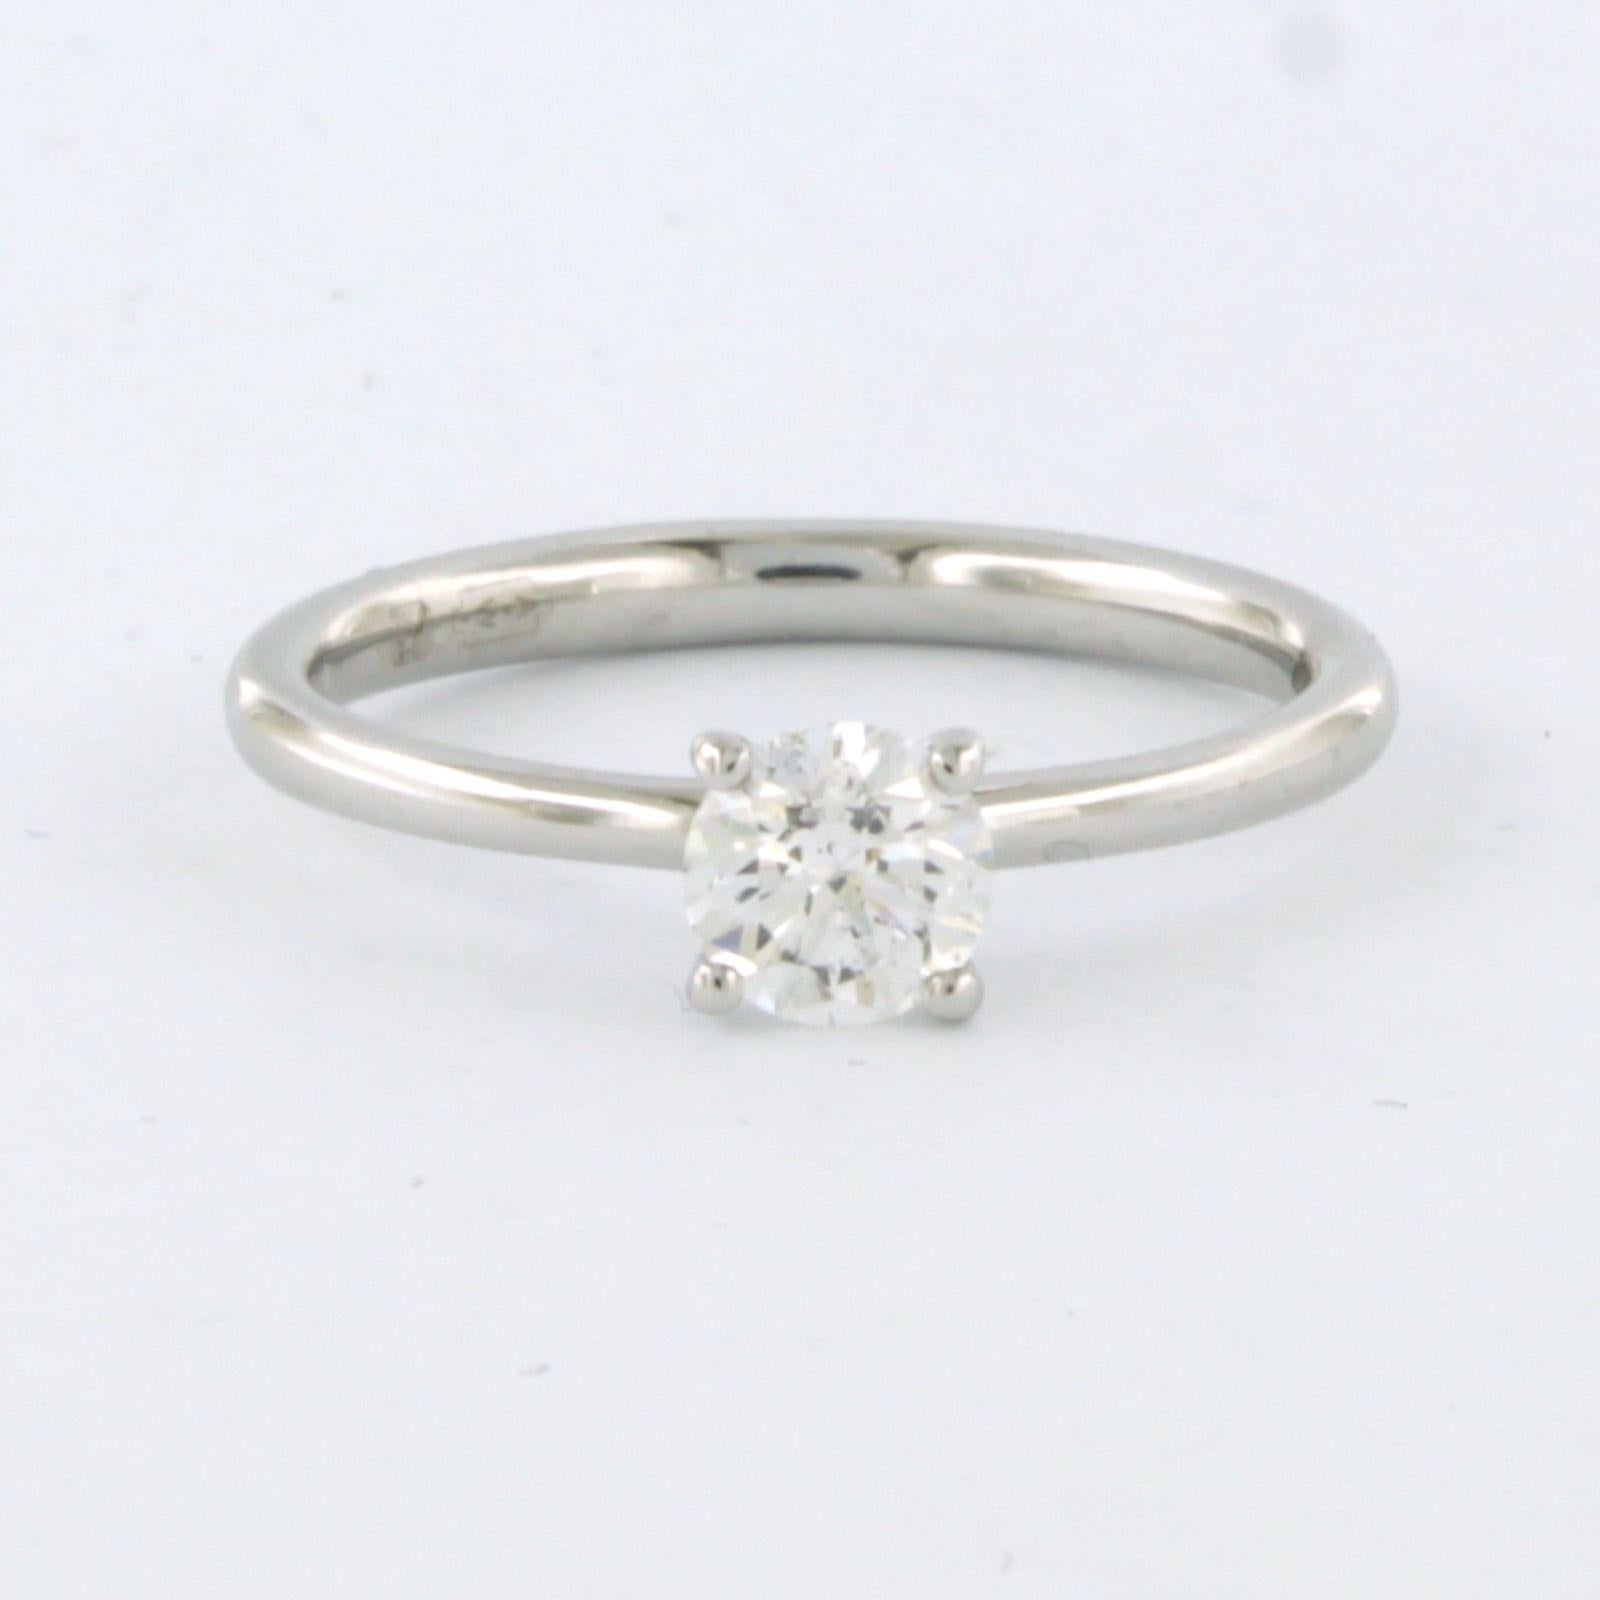 GIA certificate. - 18k gold solitaire ring with brilliant cut diamond up to . 0.52ct - E SI2 - ring size U.S. 6.5 - EU. 17(53)

detailed description:

the top of the ring is 5.1 mm wide by 5.4 mm high

weight 2.5 grams

ring size US 6.5 - EU.